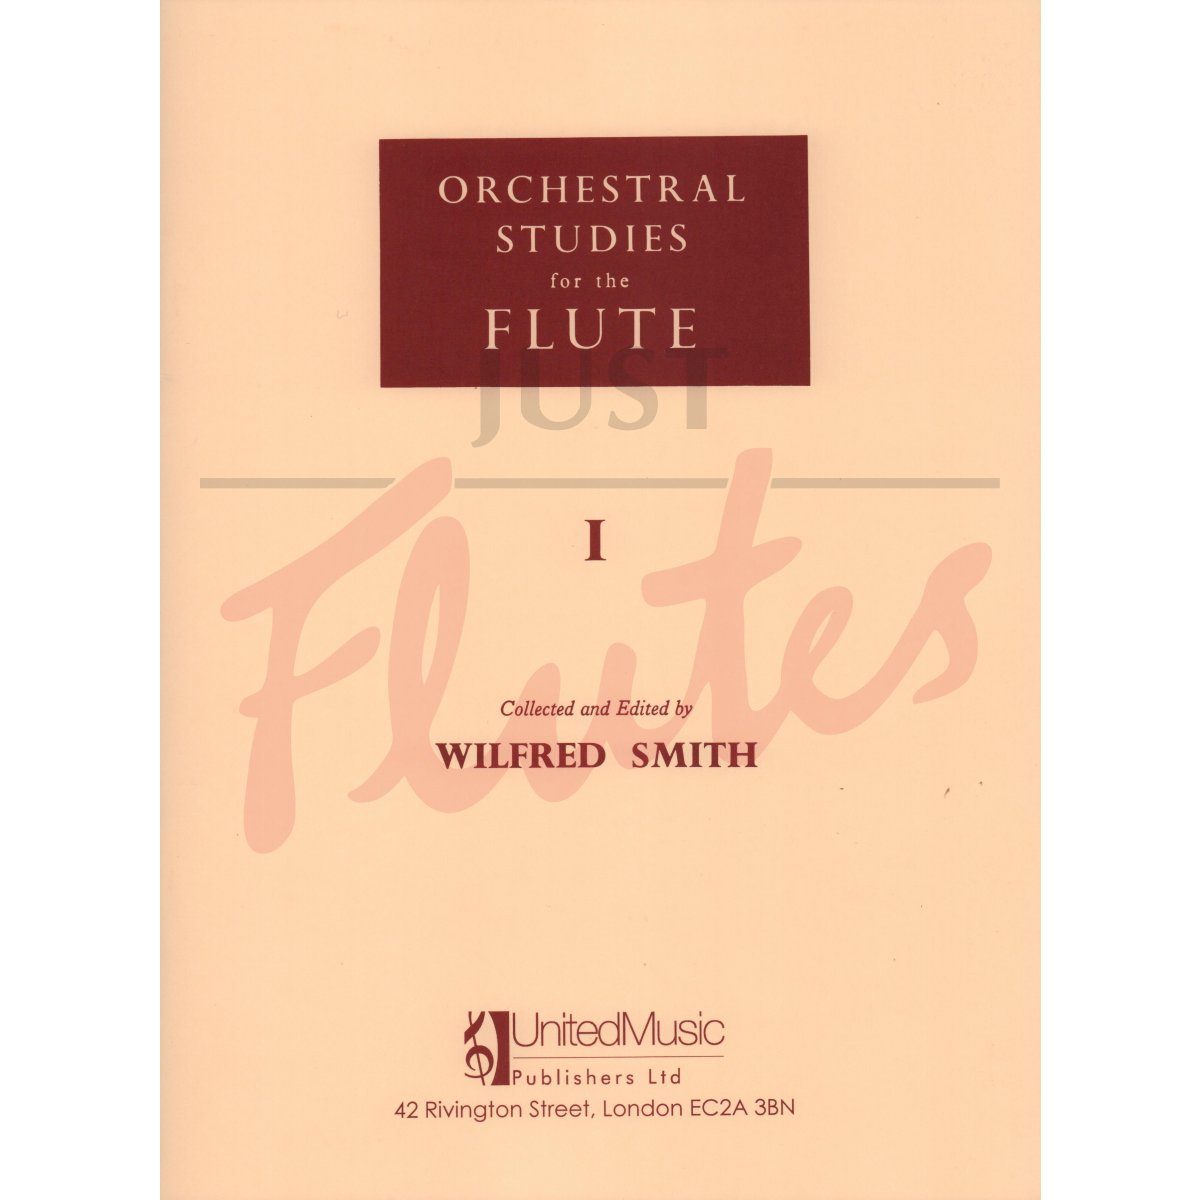 Orchestral Studies for the Flute, Volume 1: Classical Symphonies